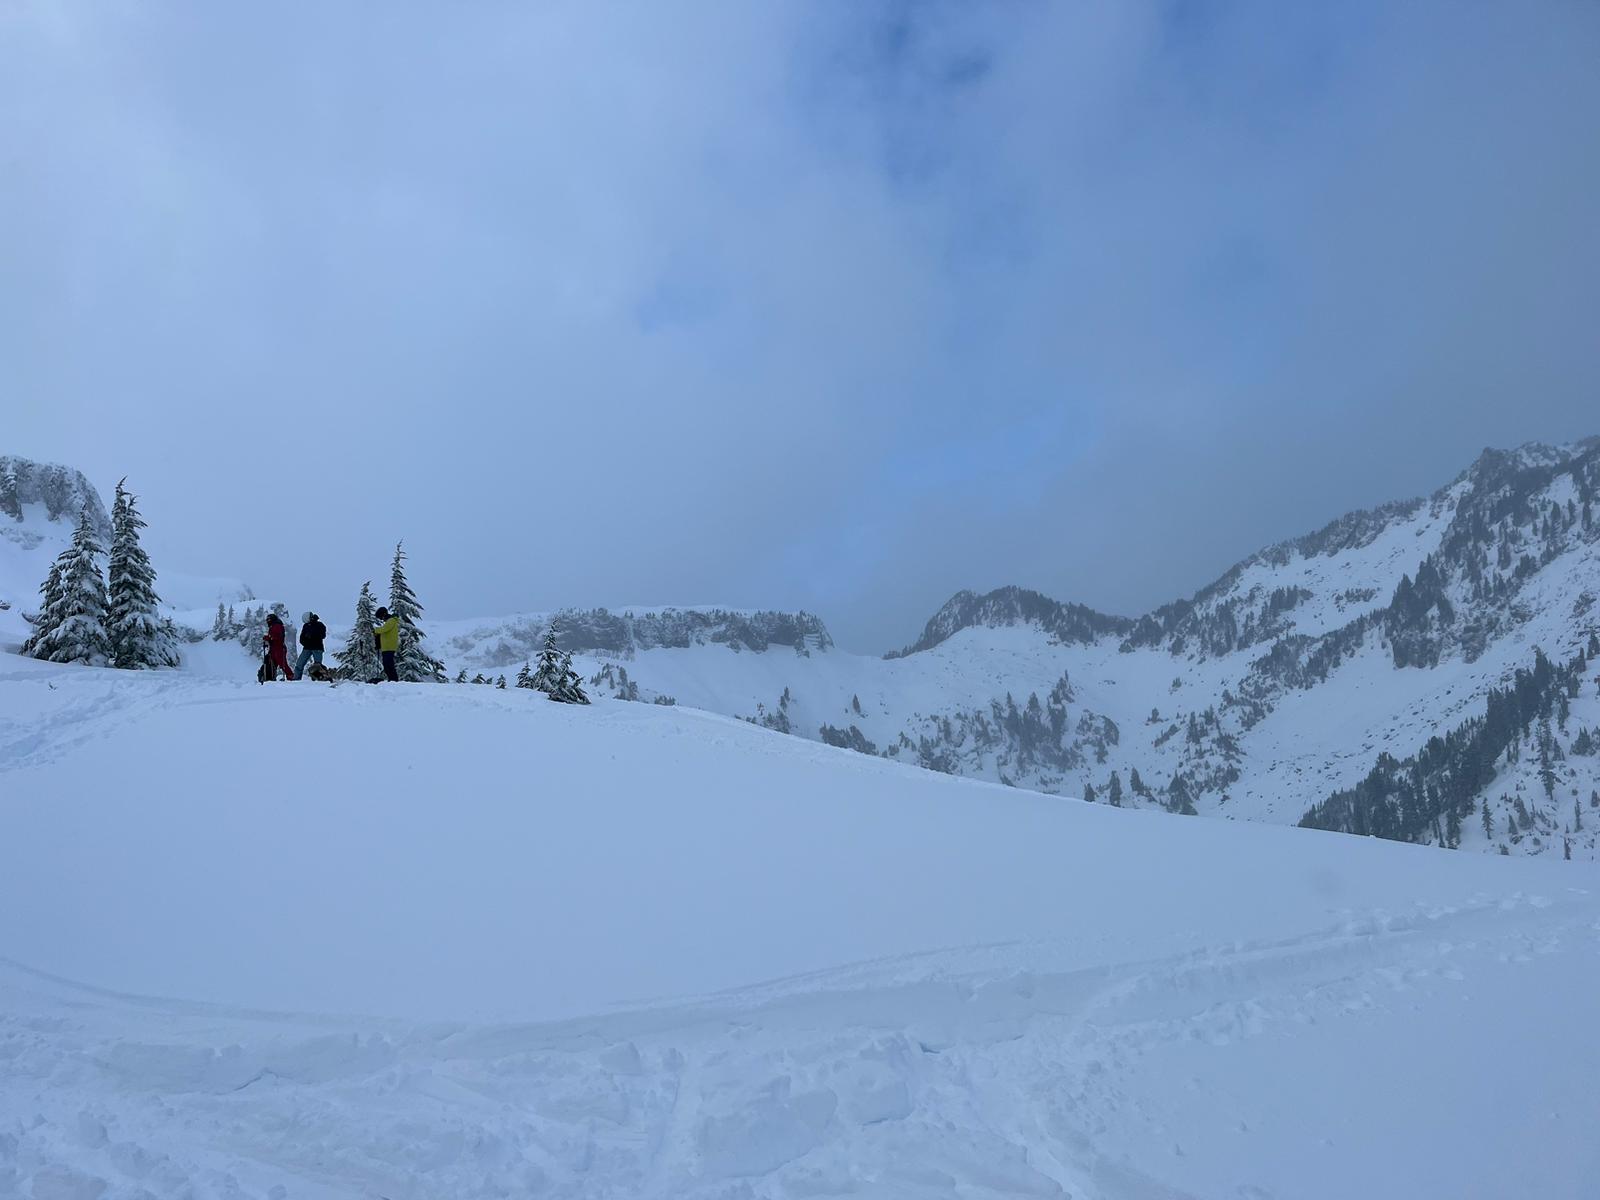 Mt Baker backcountry ski conditions in early december